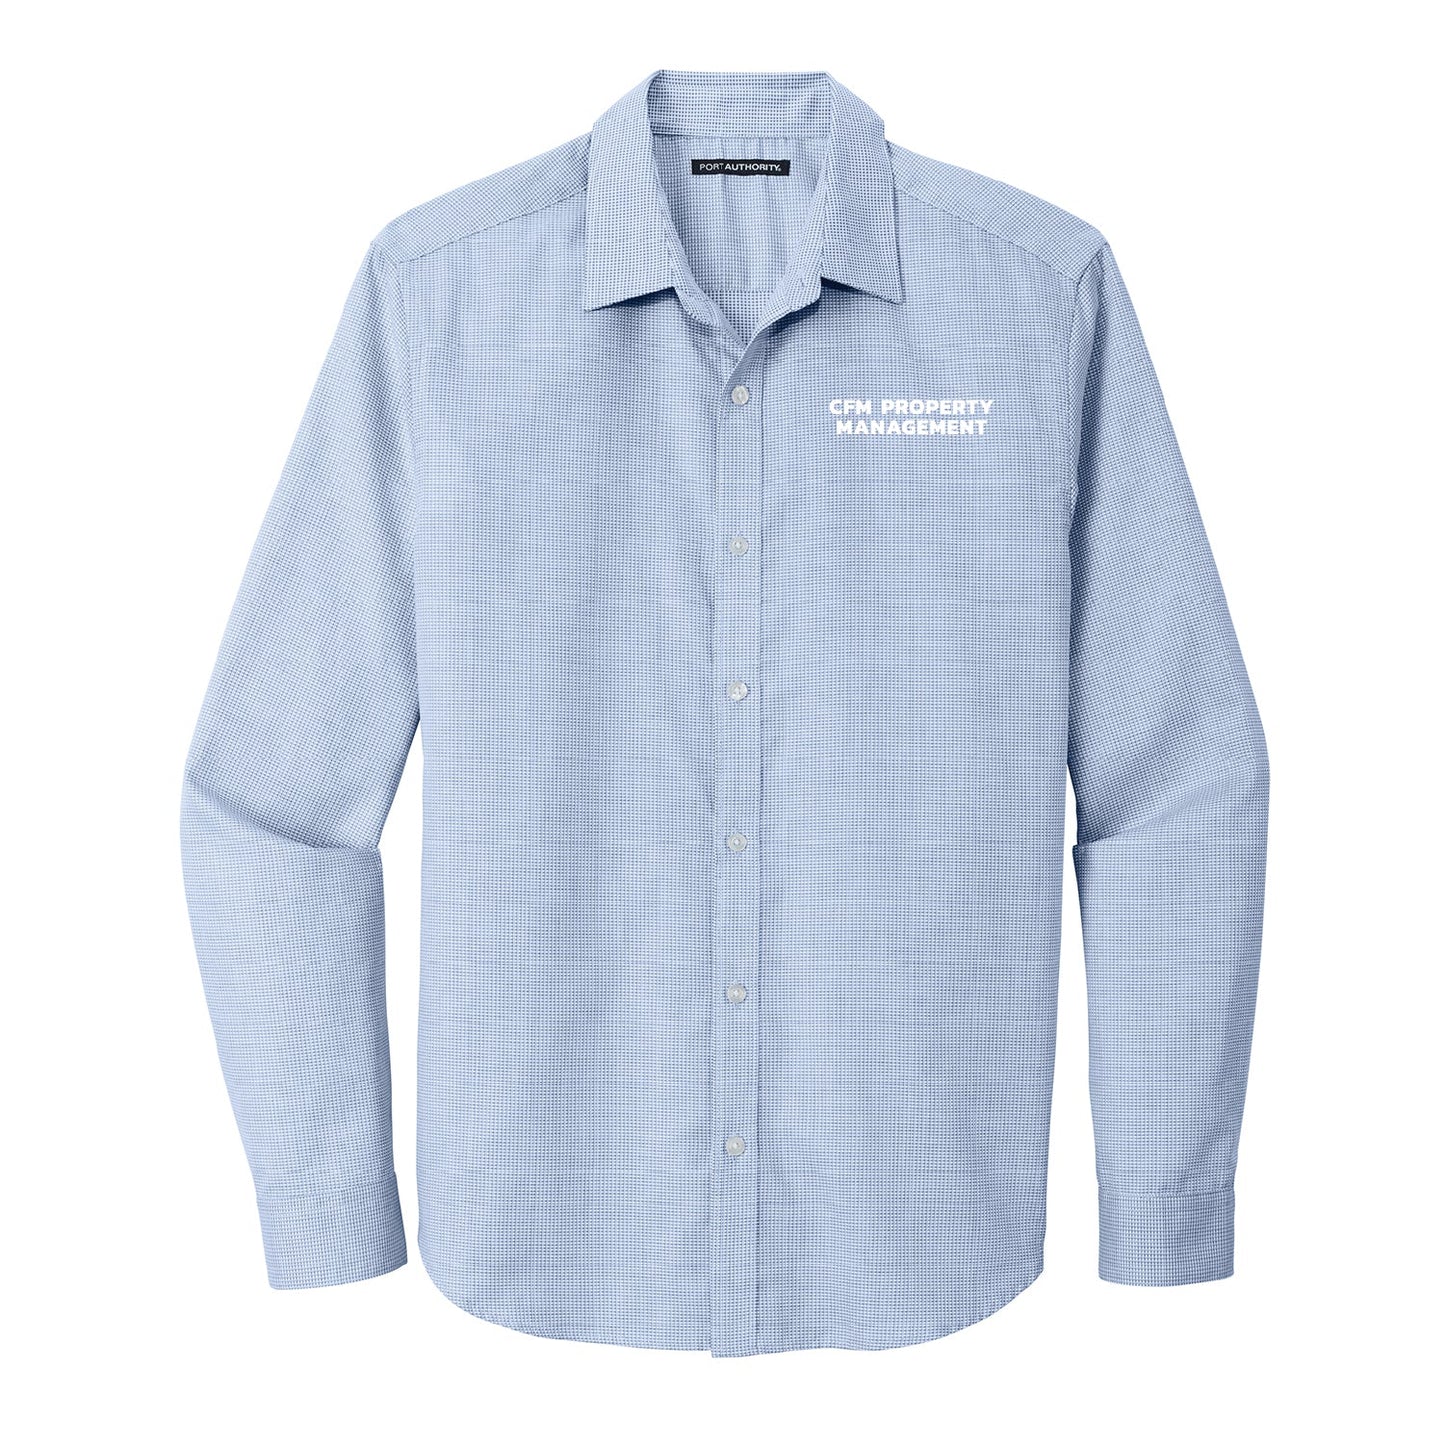 CFM 3 Pincheck Easy Care Shirt - DSP On Demand